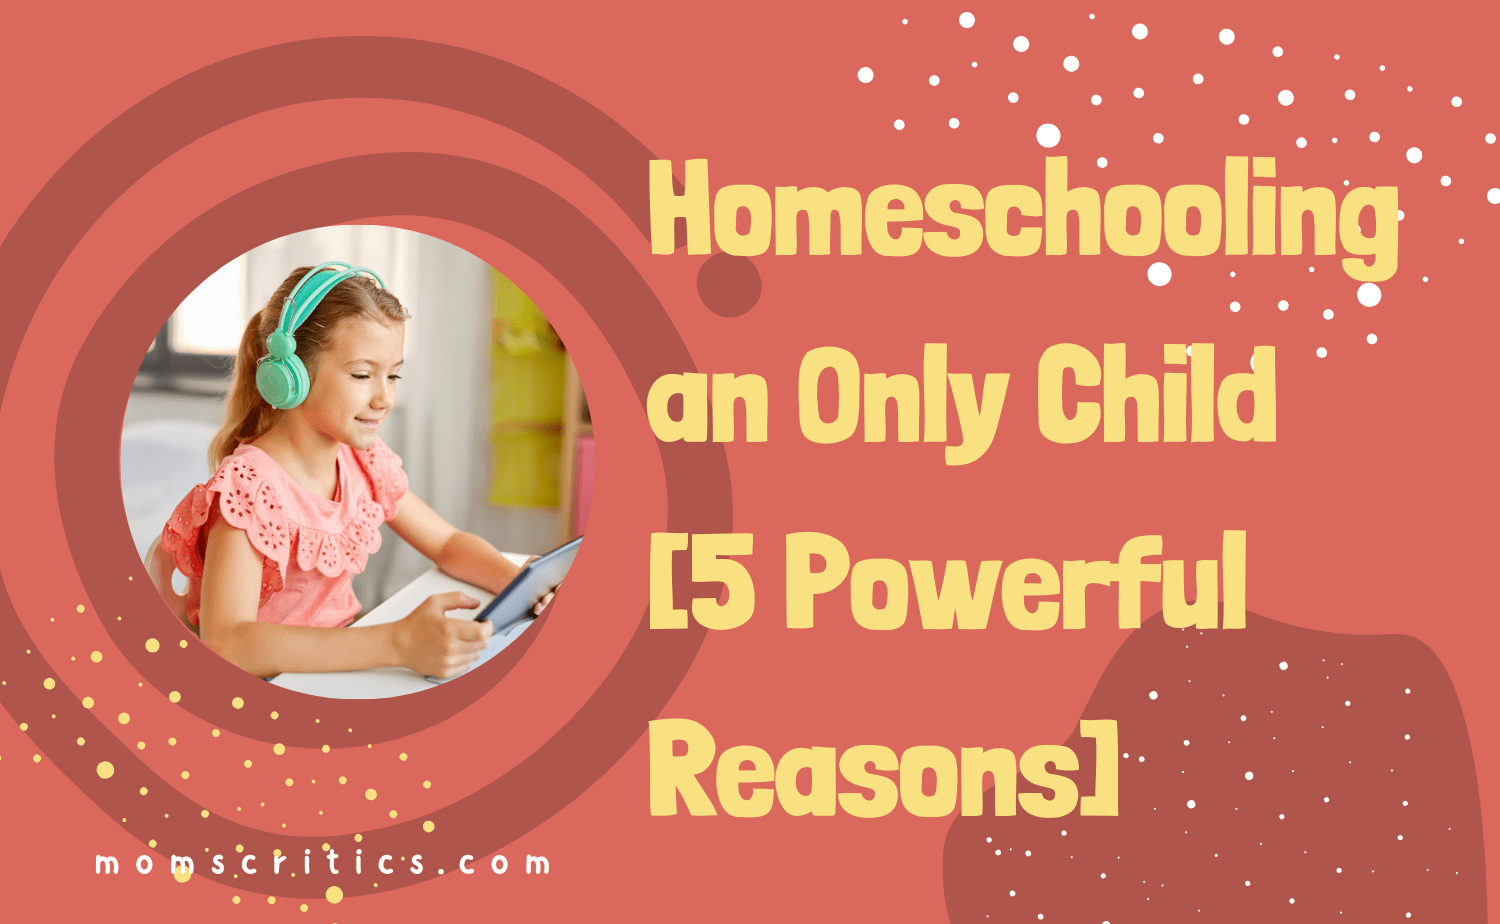 Homeschooling an Only Child